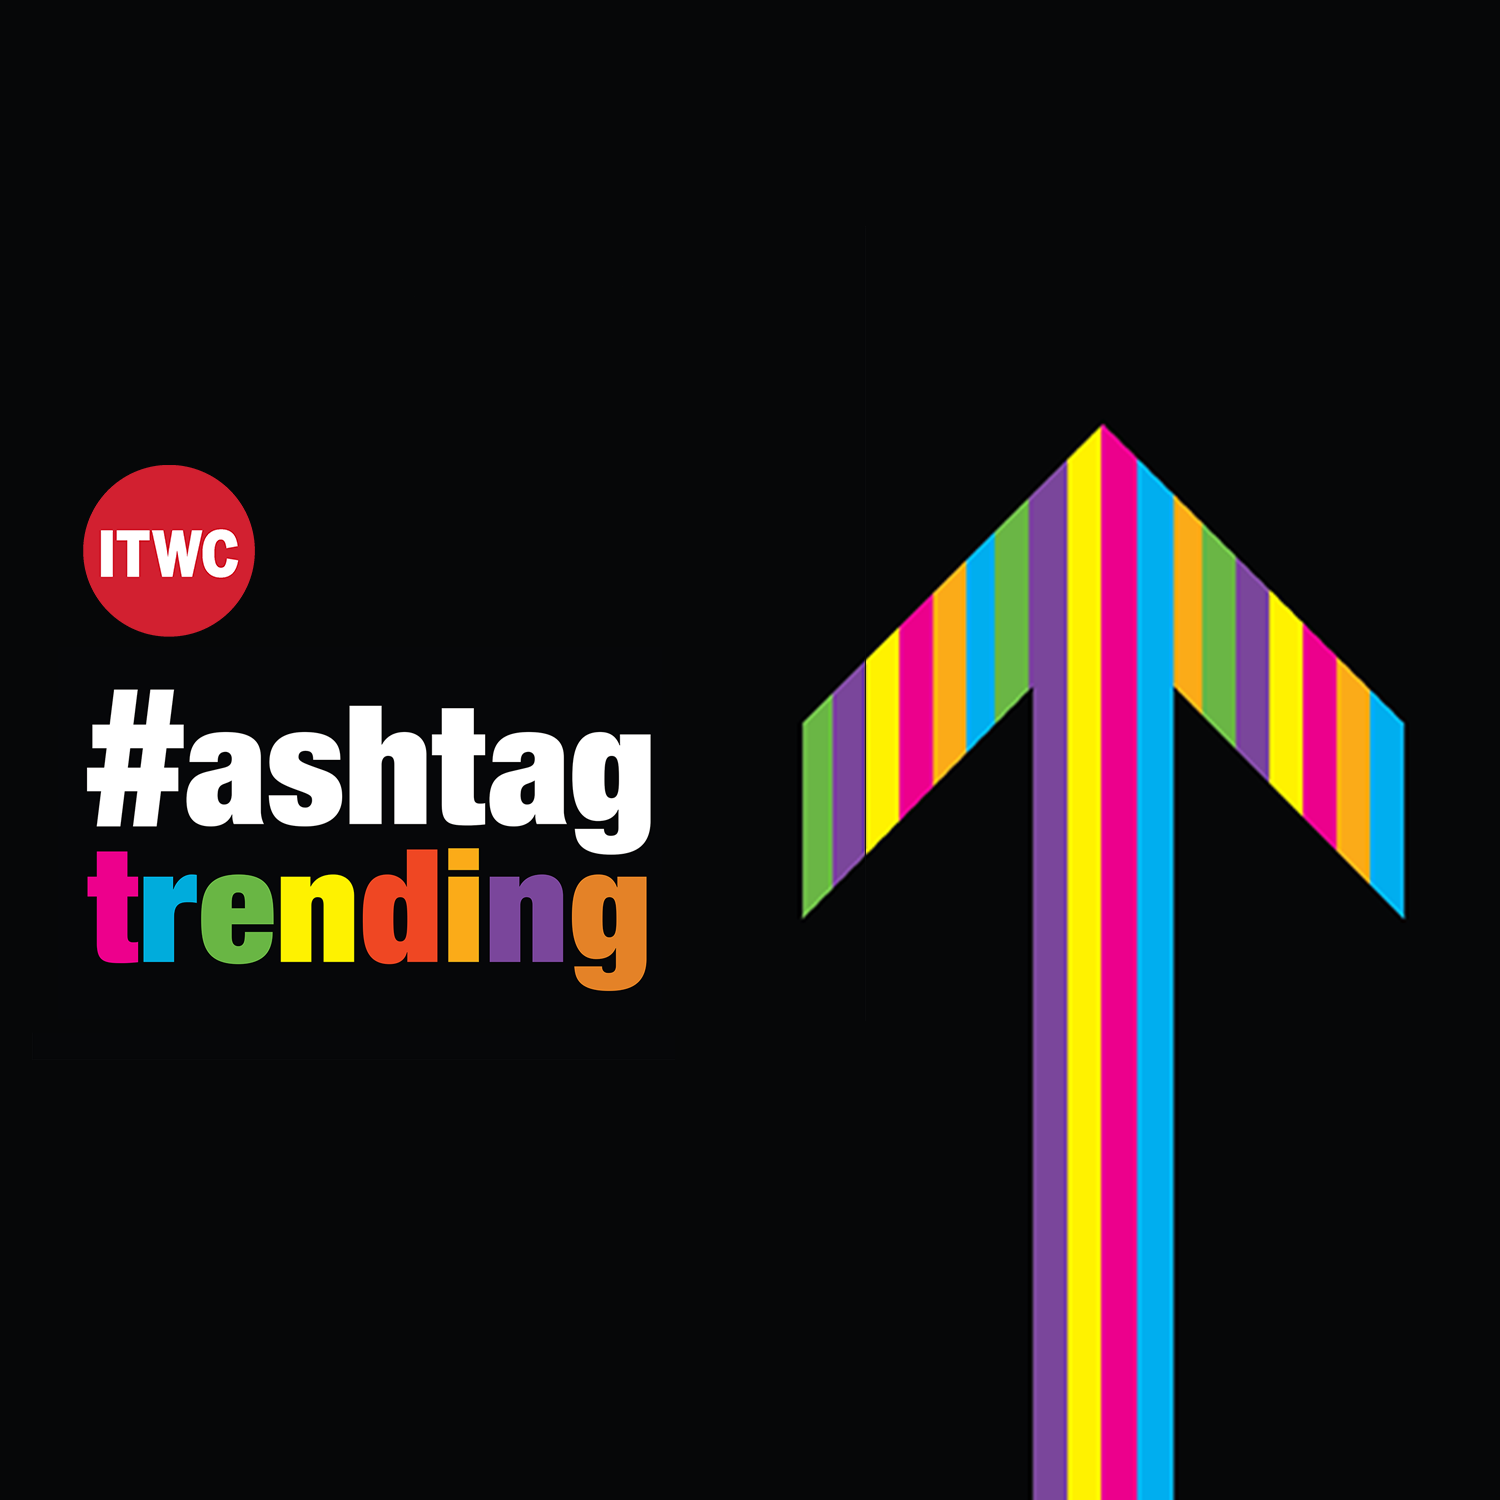 Hashtag Trending, June 16, 2021- Global Supply Chain Chaos; The New Facebook; Shopify’s …